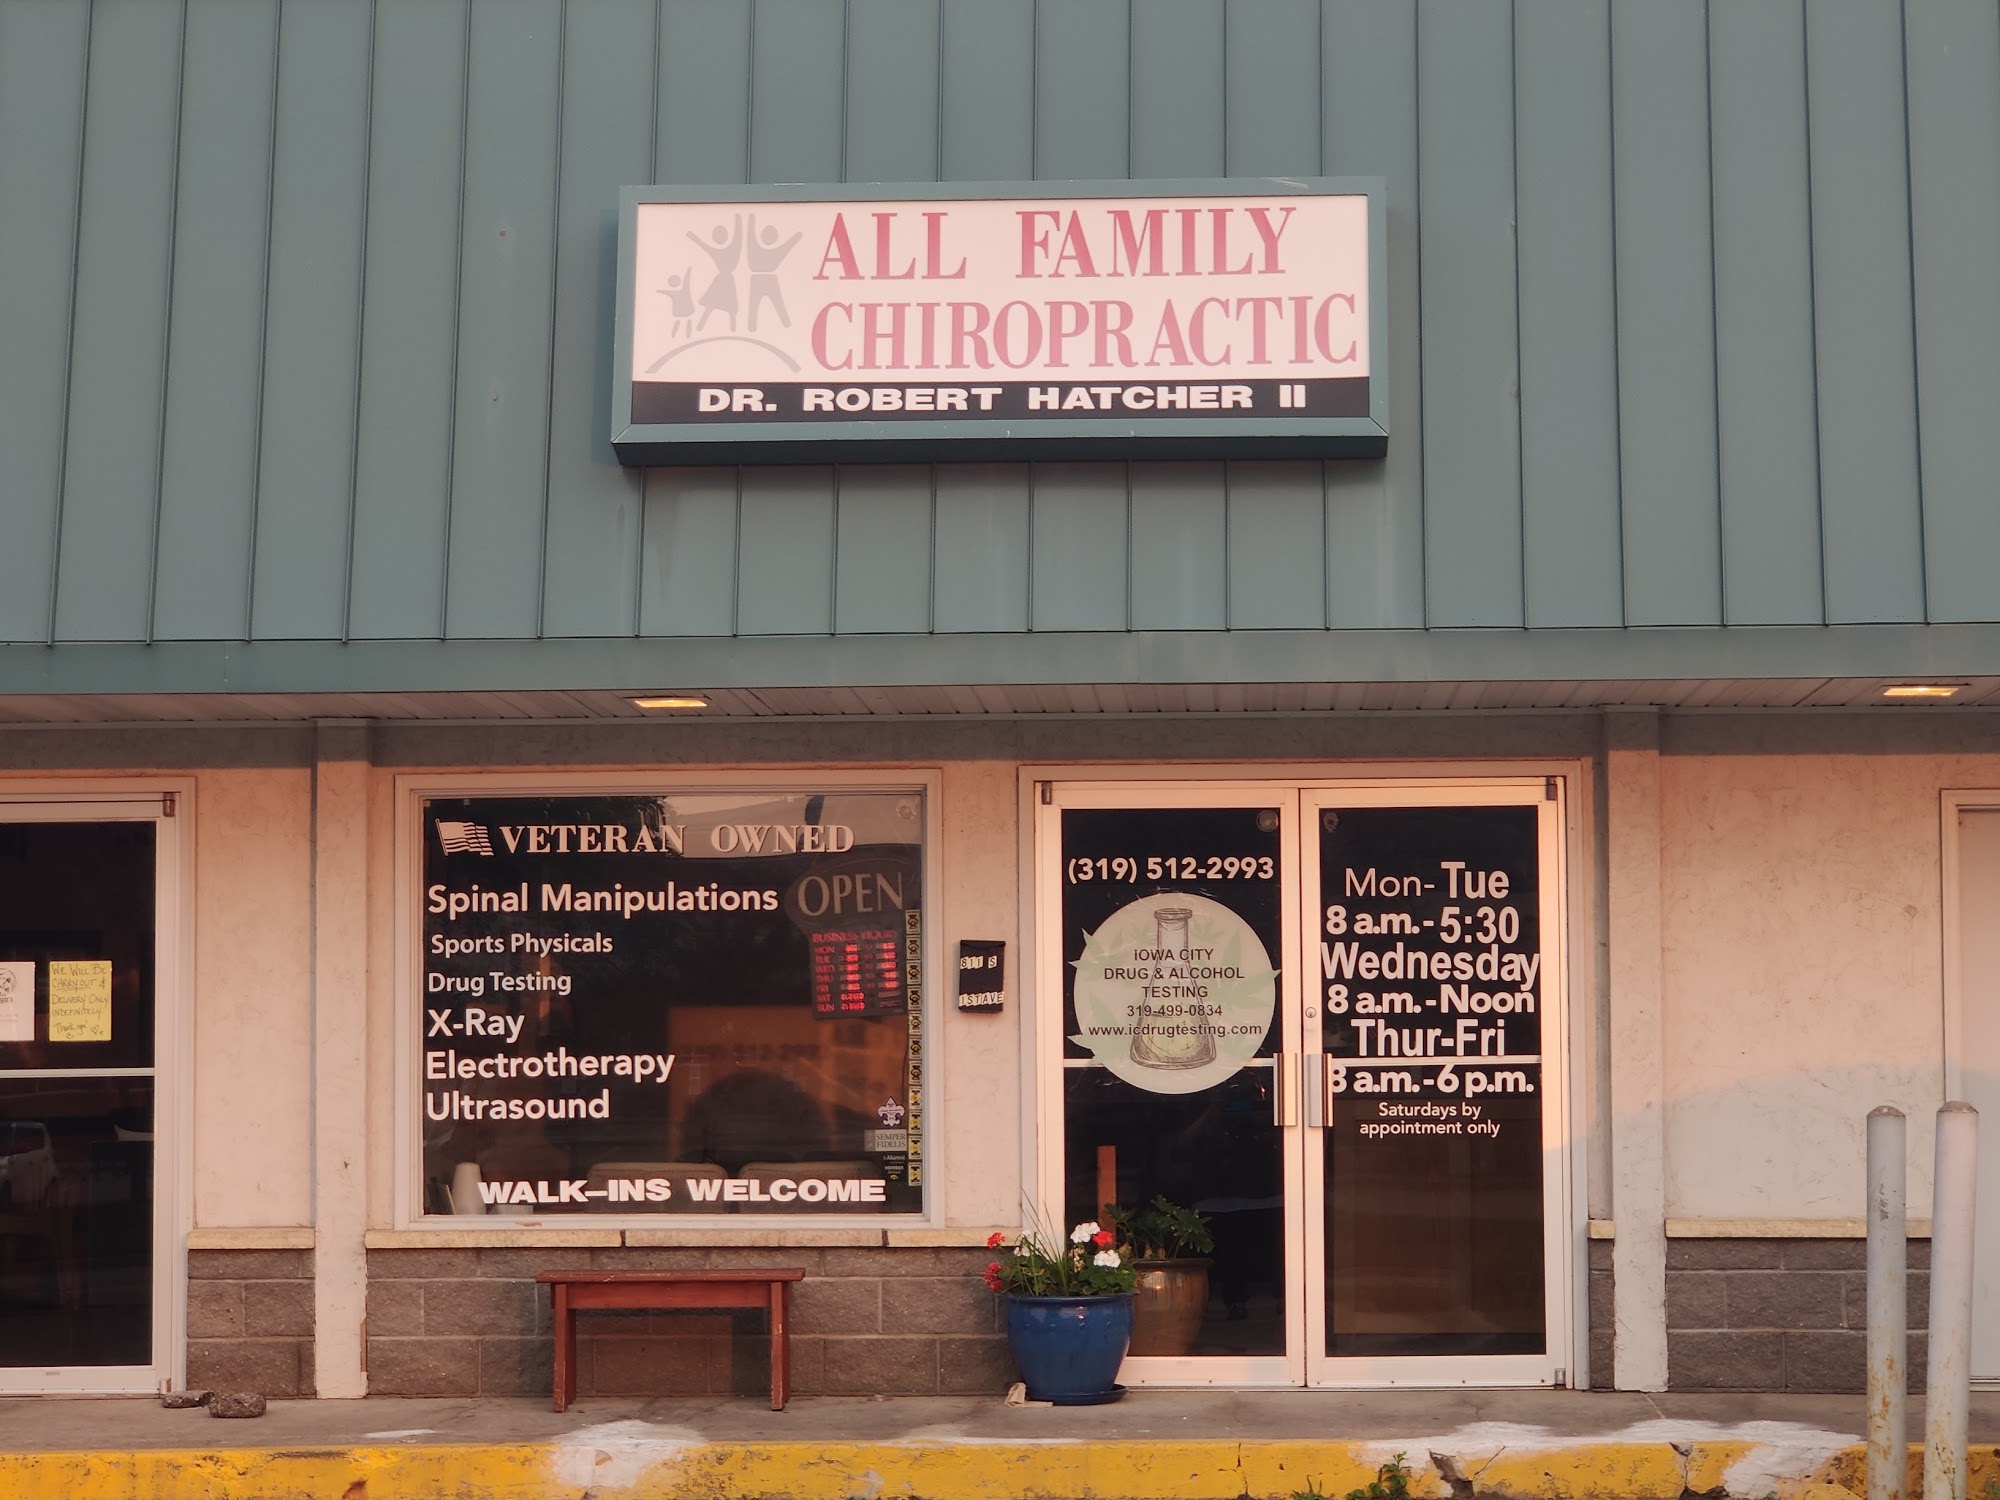 All Family Chiropractic